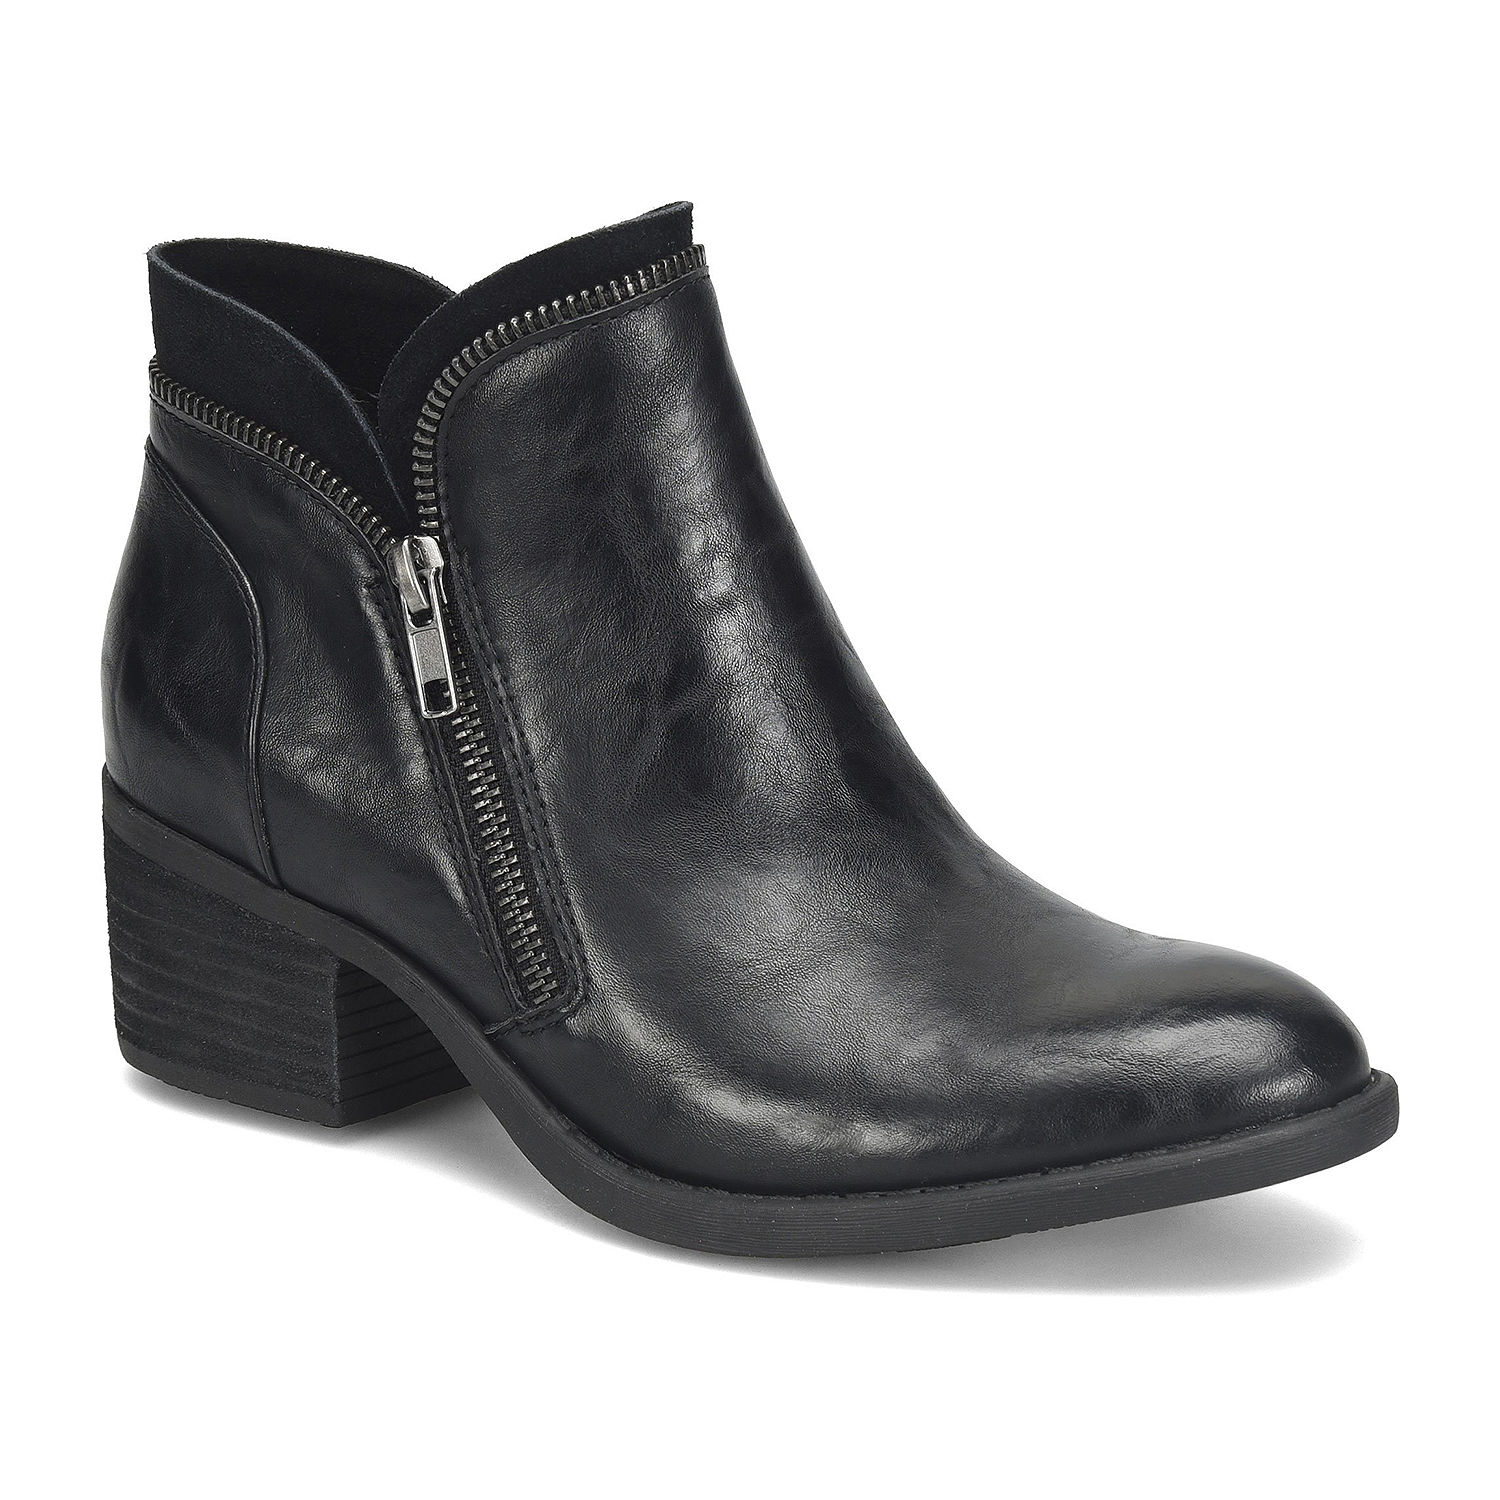 Boc Womens Dempsey Stacked Heel Booties - JCPenney